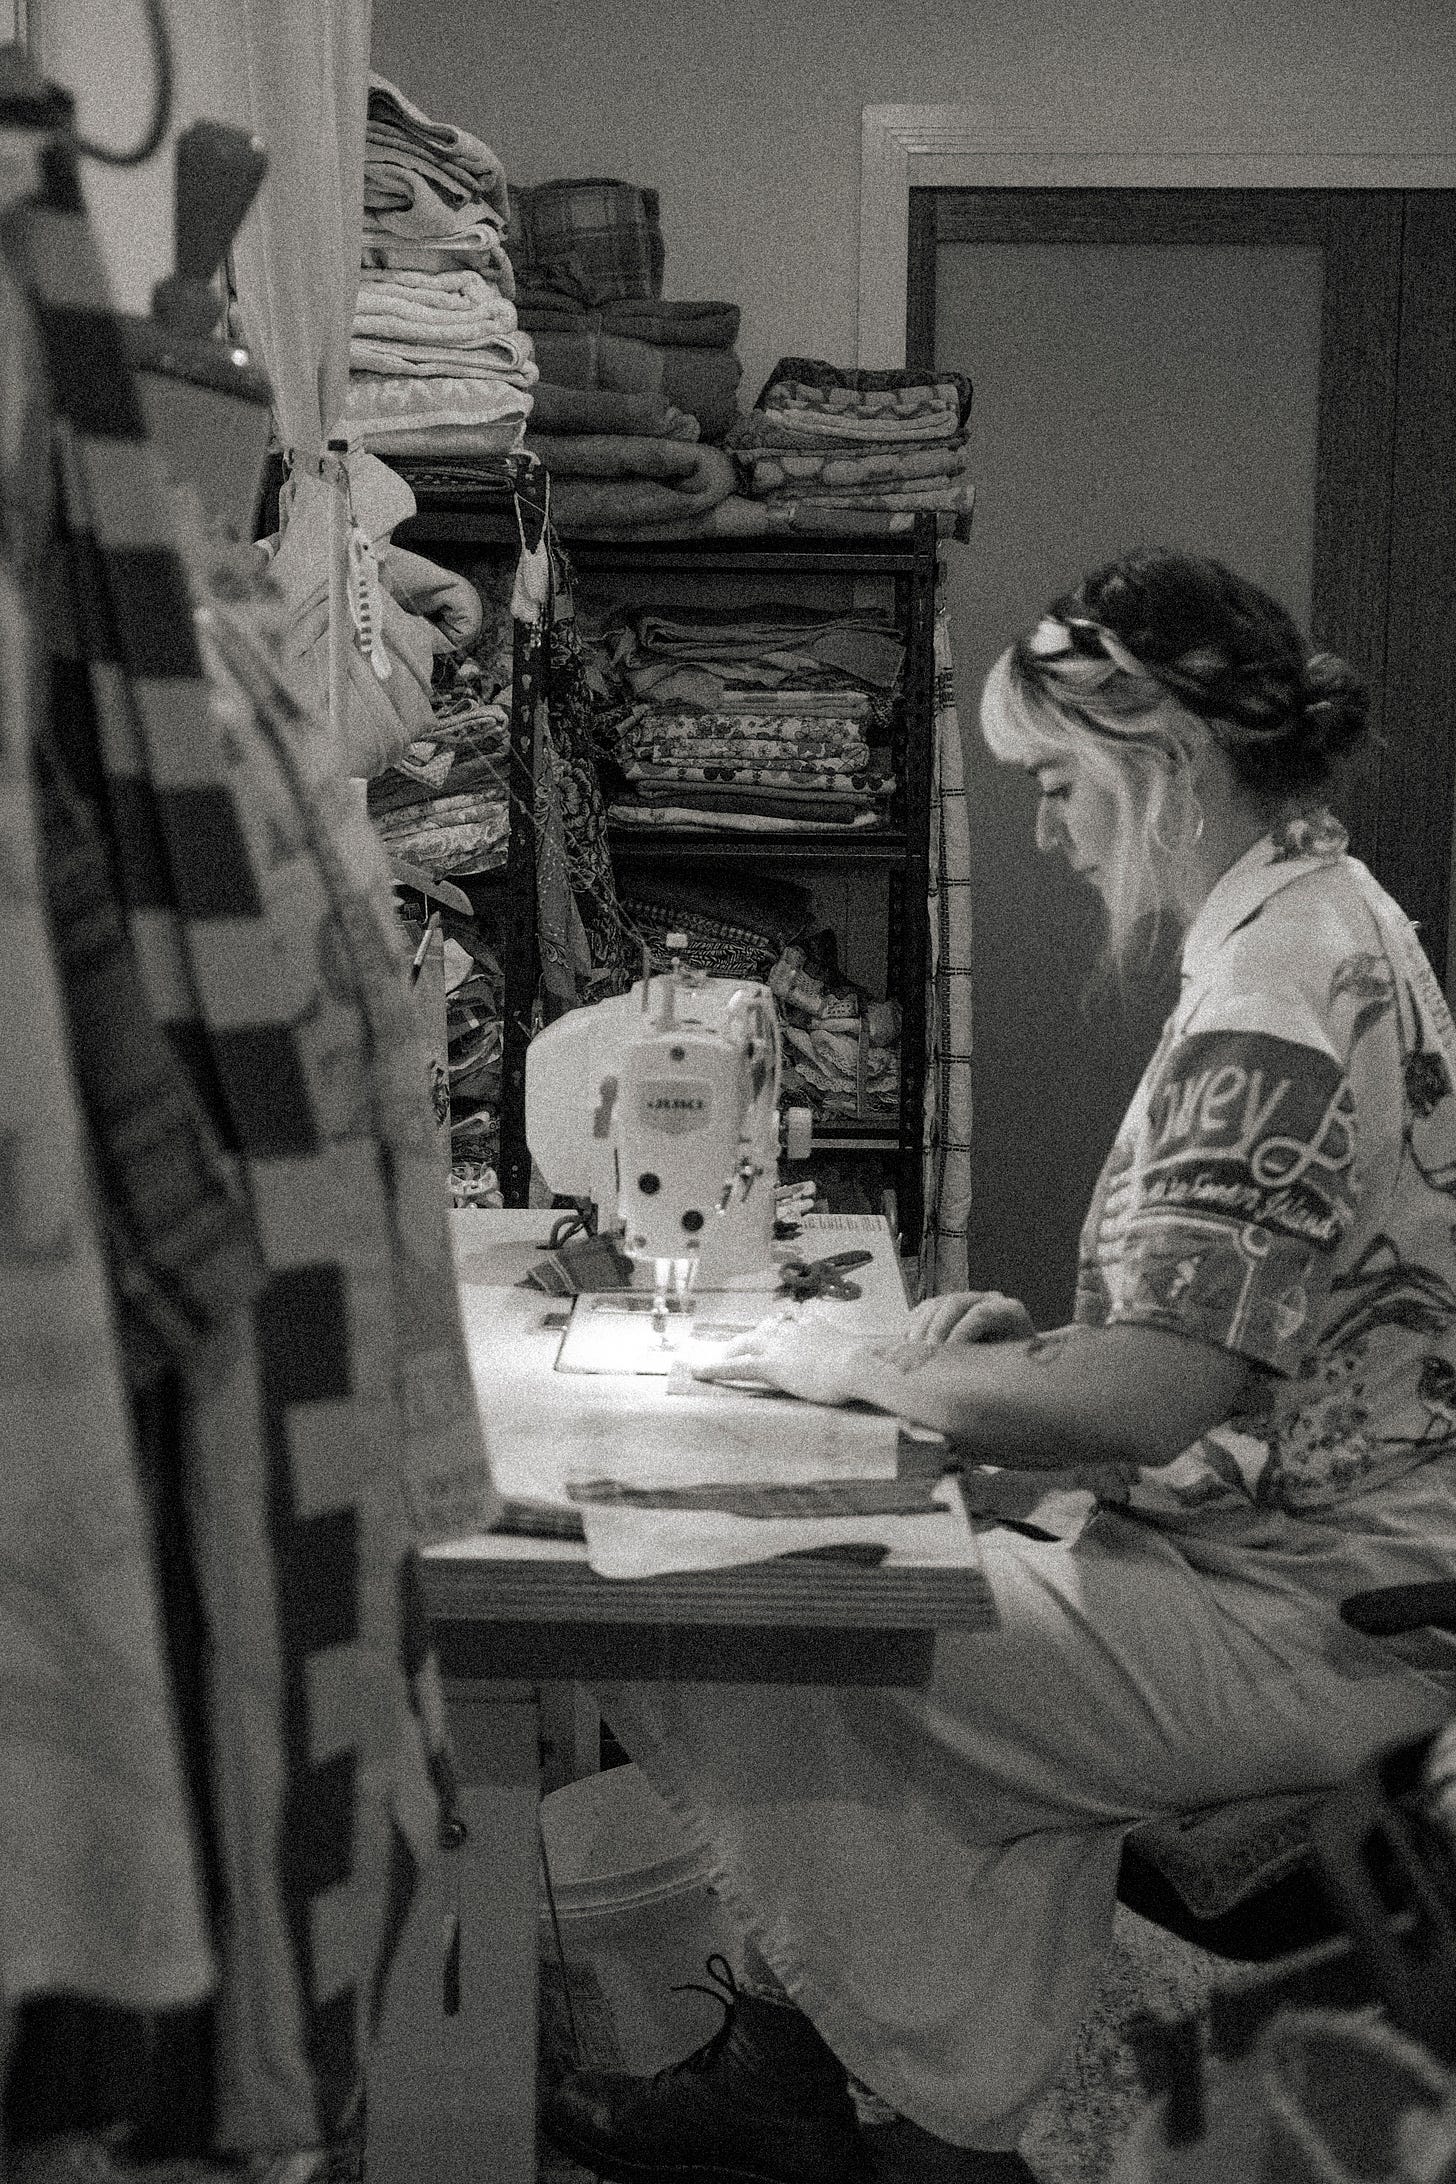 a photo of Clare from House of Clare sewing on her sewing machine. She is sitting at a table with her fabrics sitting next to her on a big shelf. She is wearing one of her beautiful button up shirts.